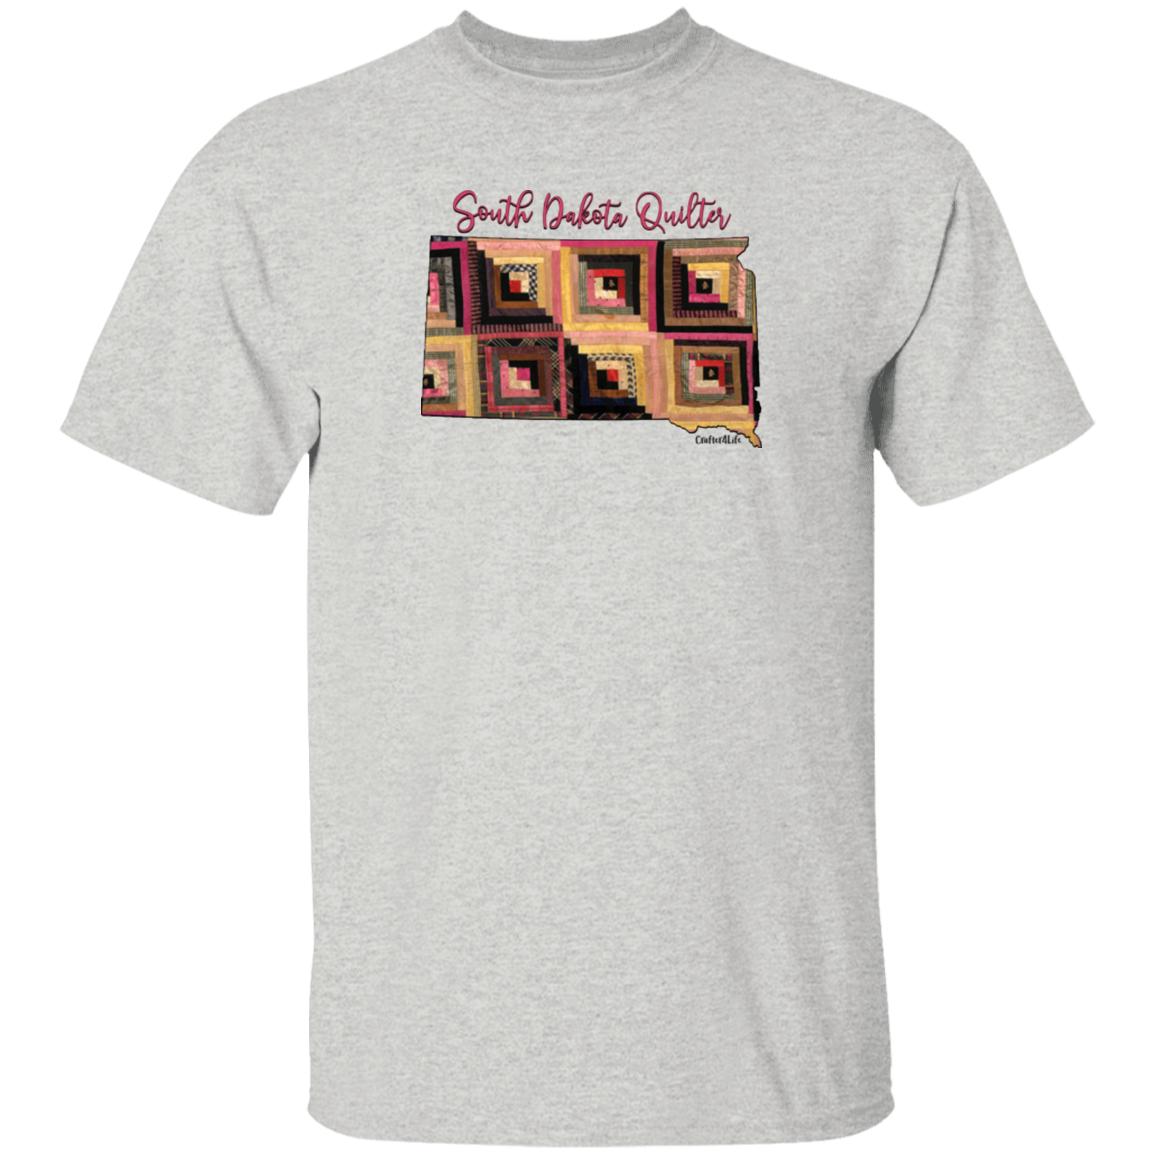 South Dakota Quilter T-Shirt, Gift for Quilting Friends and Family